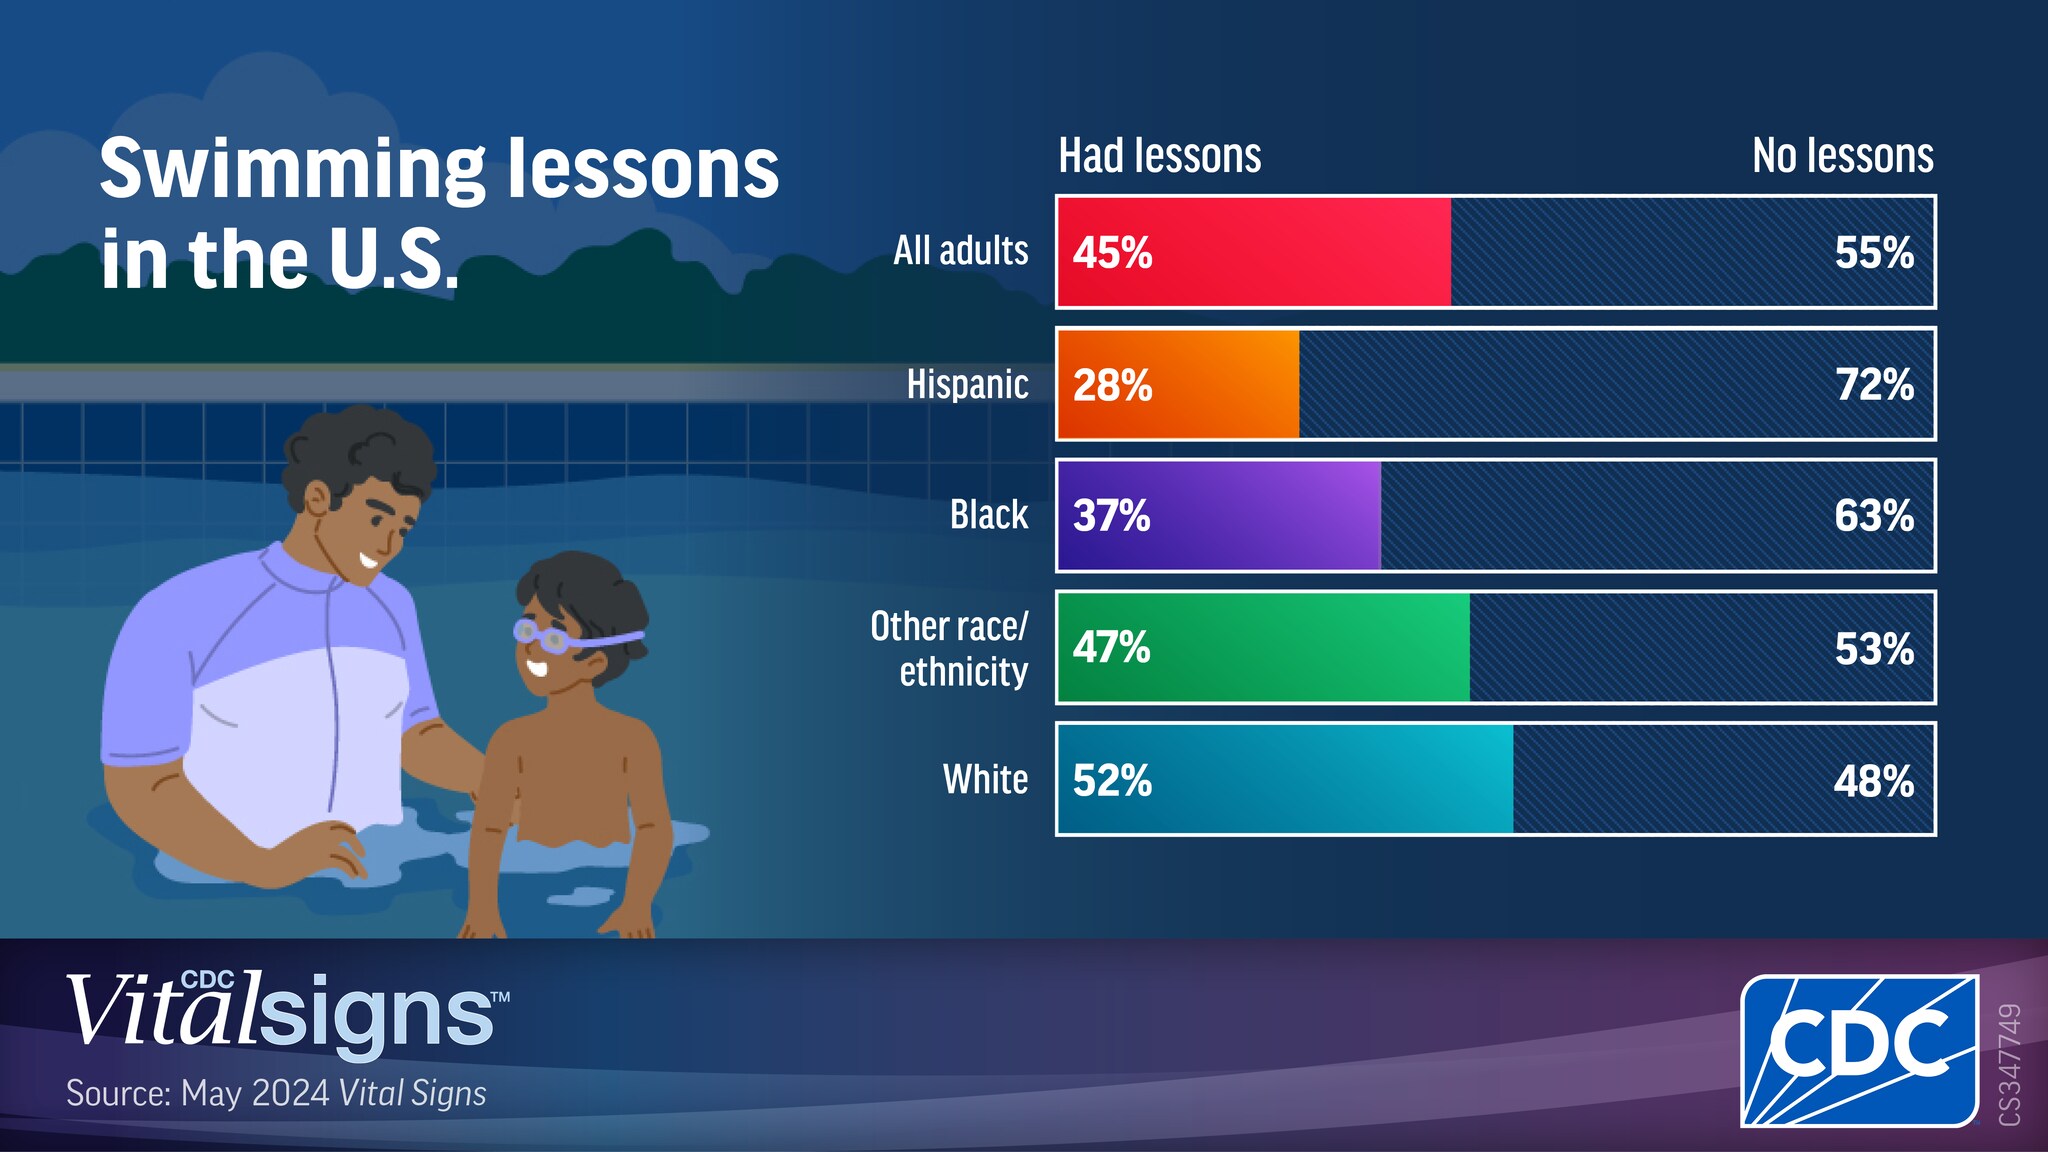 Only 28% of Hispanic people and 37% of Black people have taken swimming lessons.